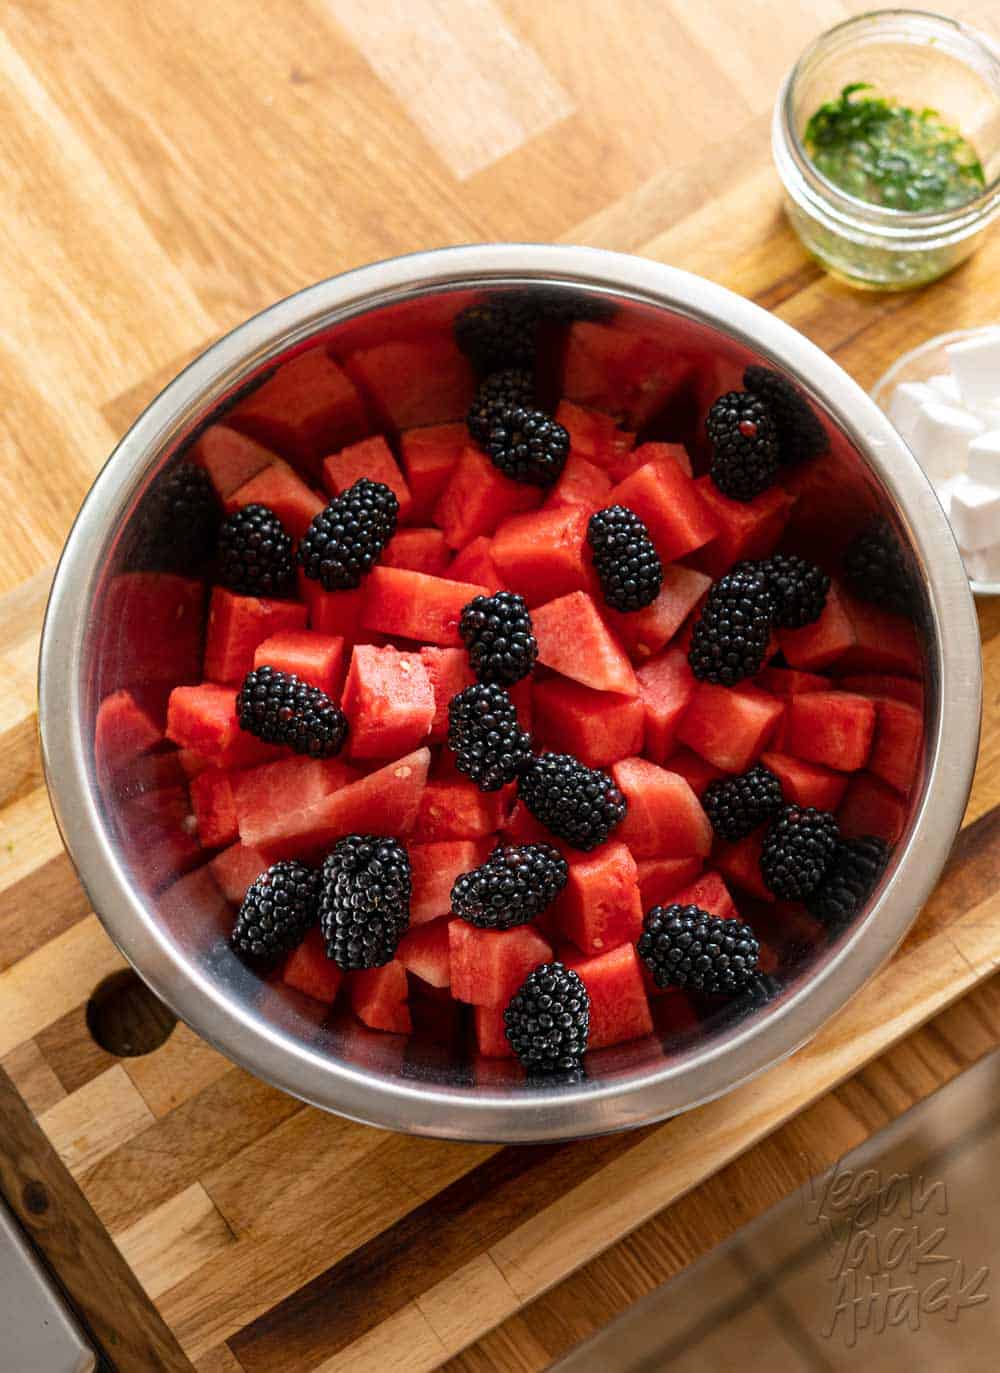 Large metal bowl filled with cubed watermelon and blackberries